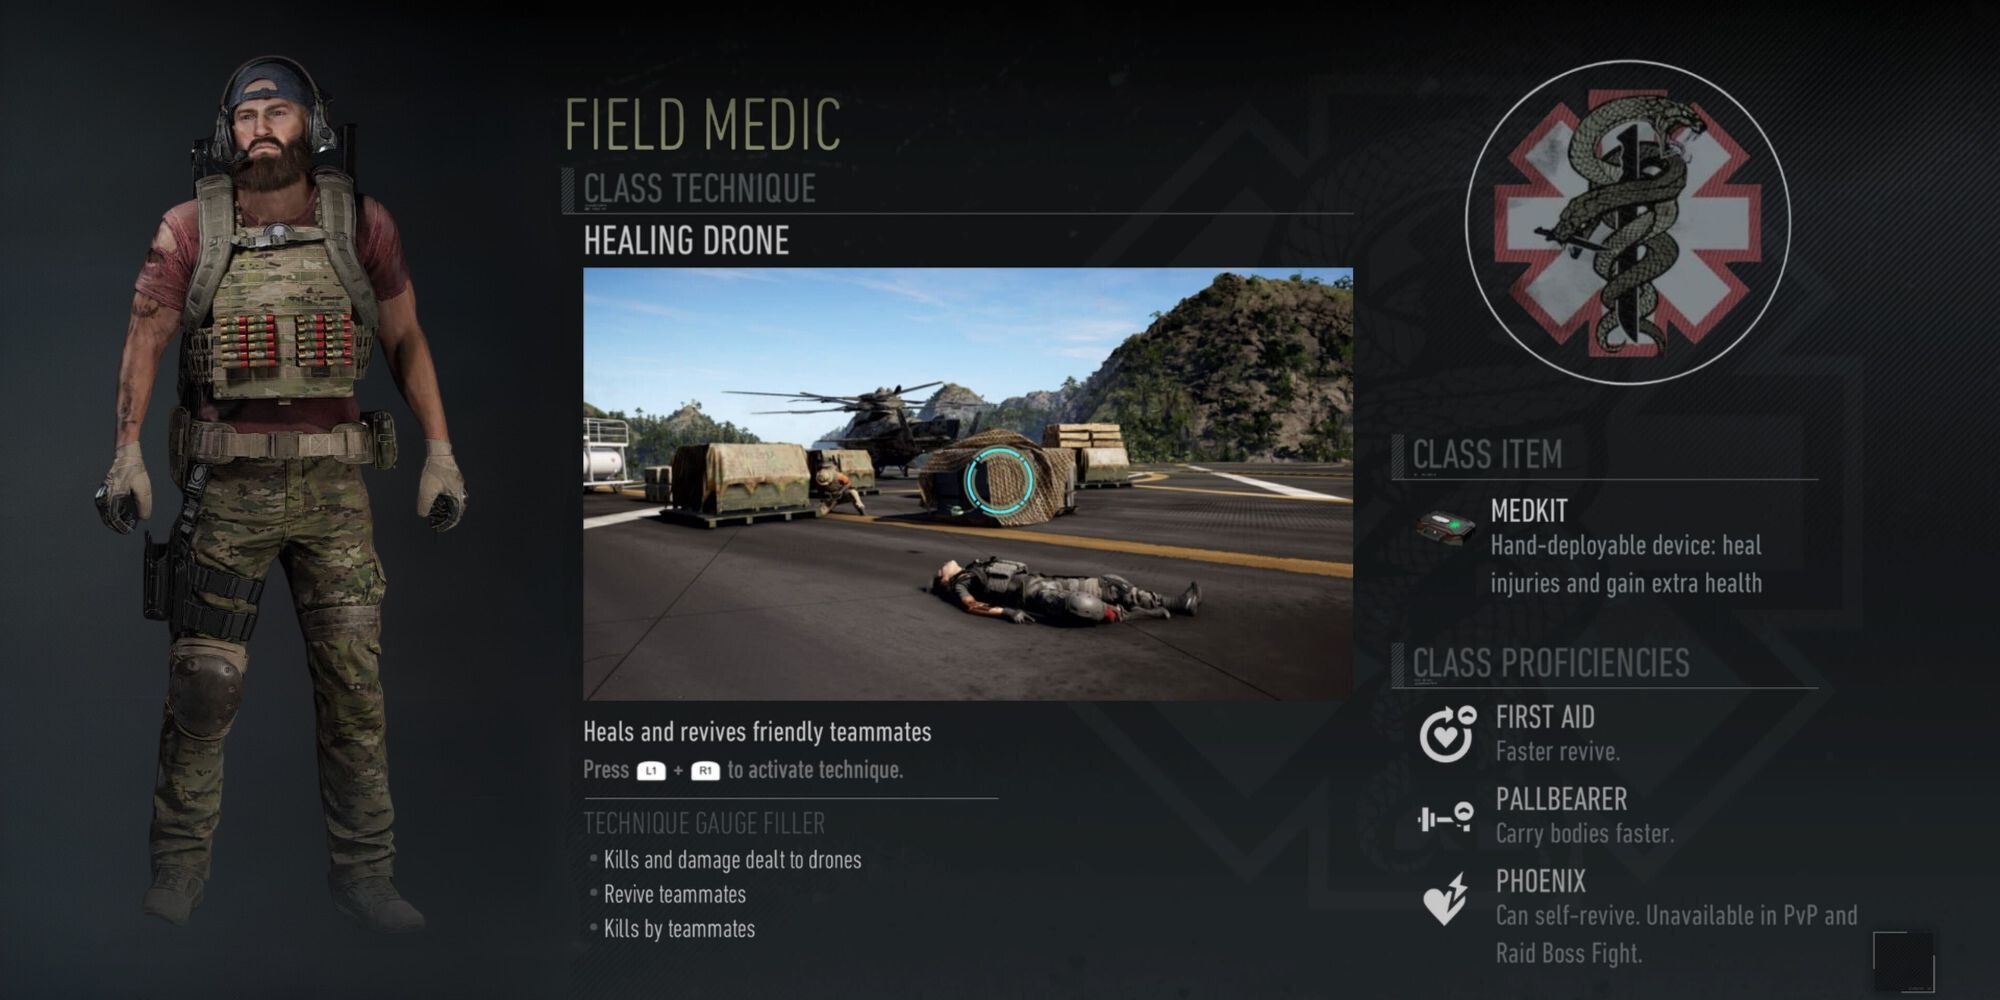 The Field Medic class from Ghost Recon Breakpoint accompanied by a solider and the class logo